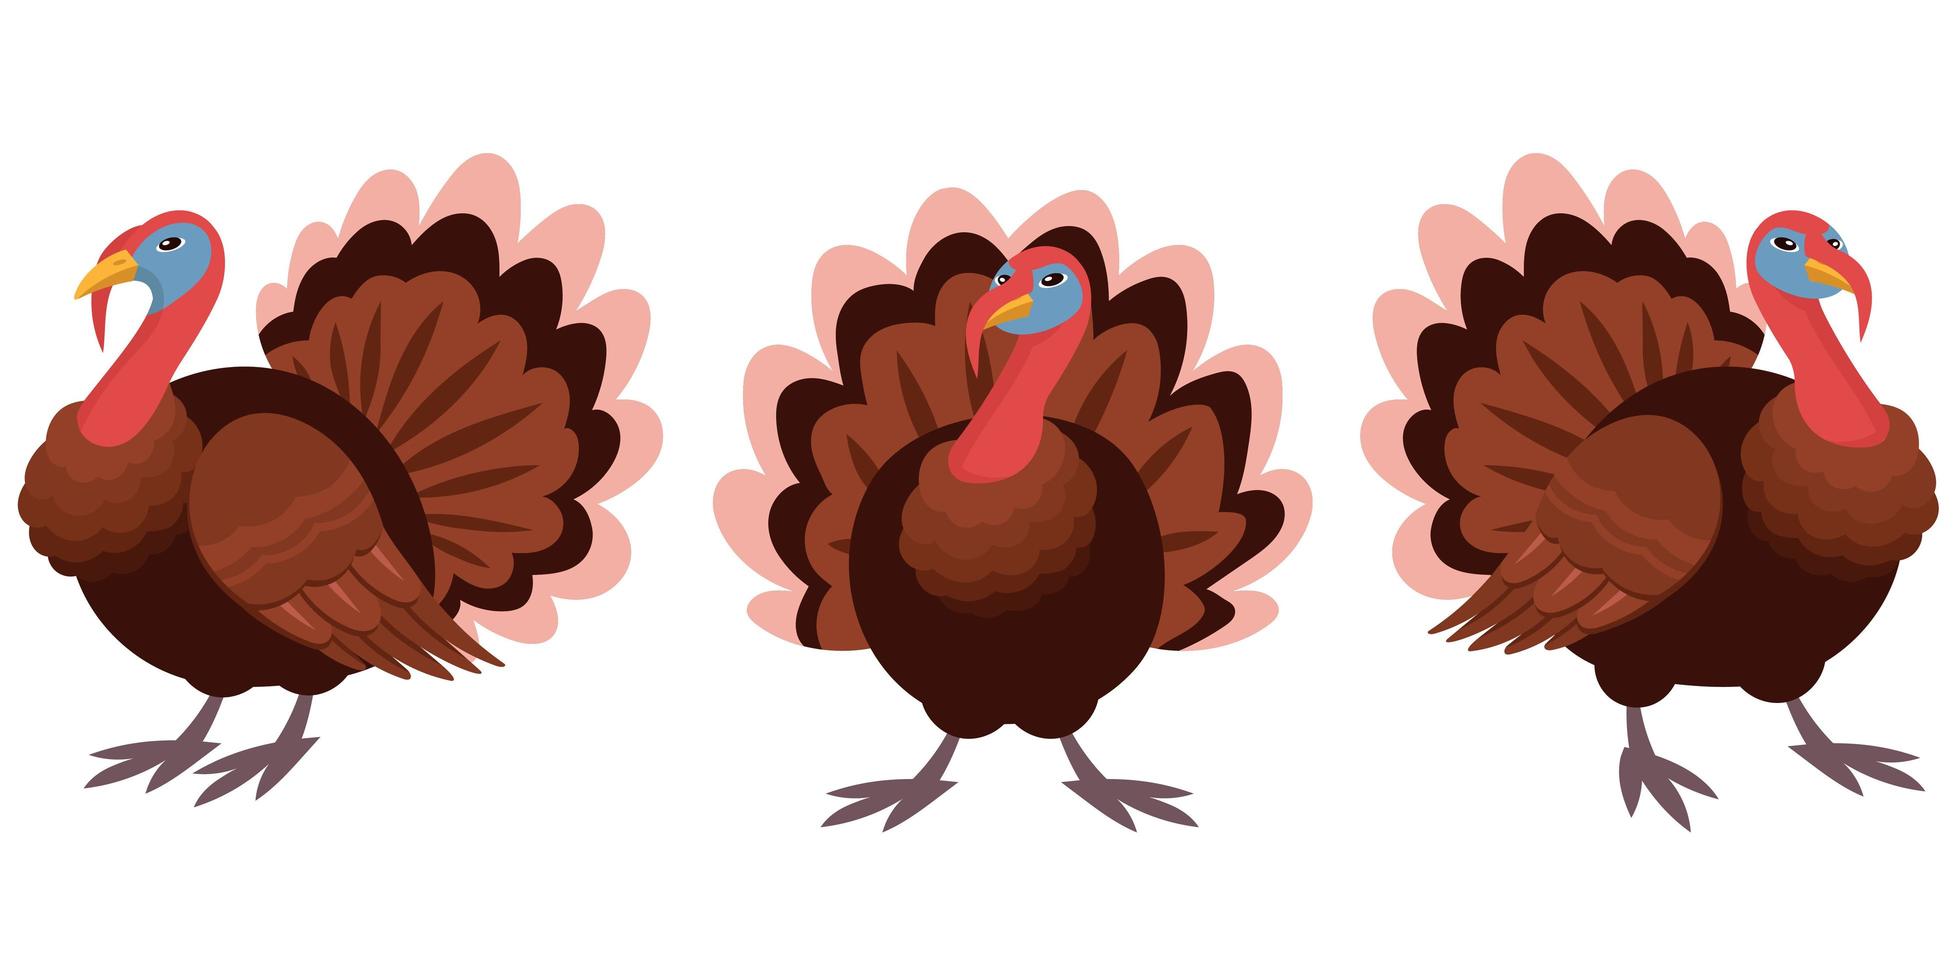 Gobbler in different poses. vector